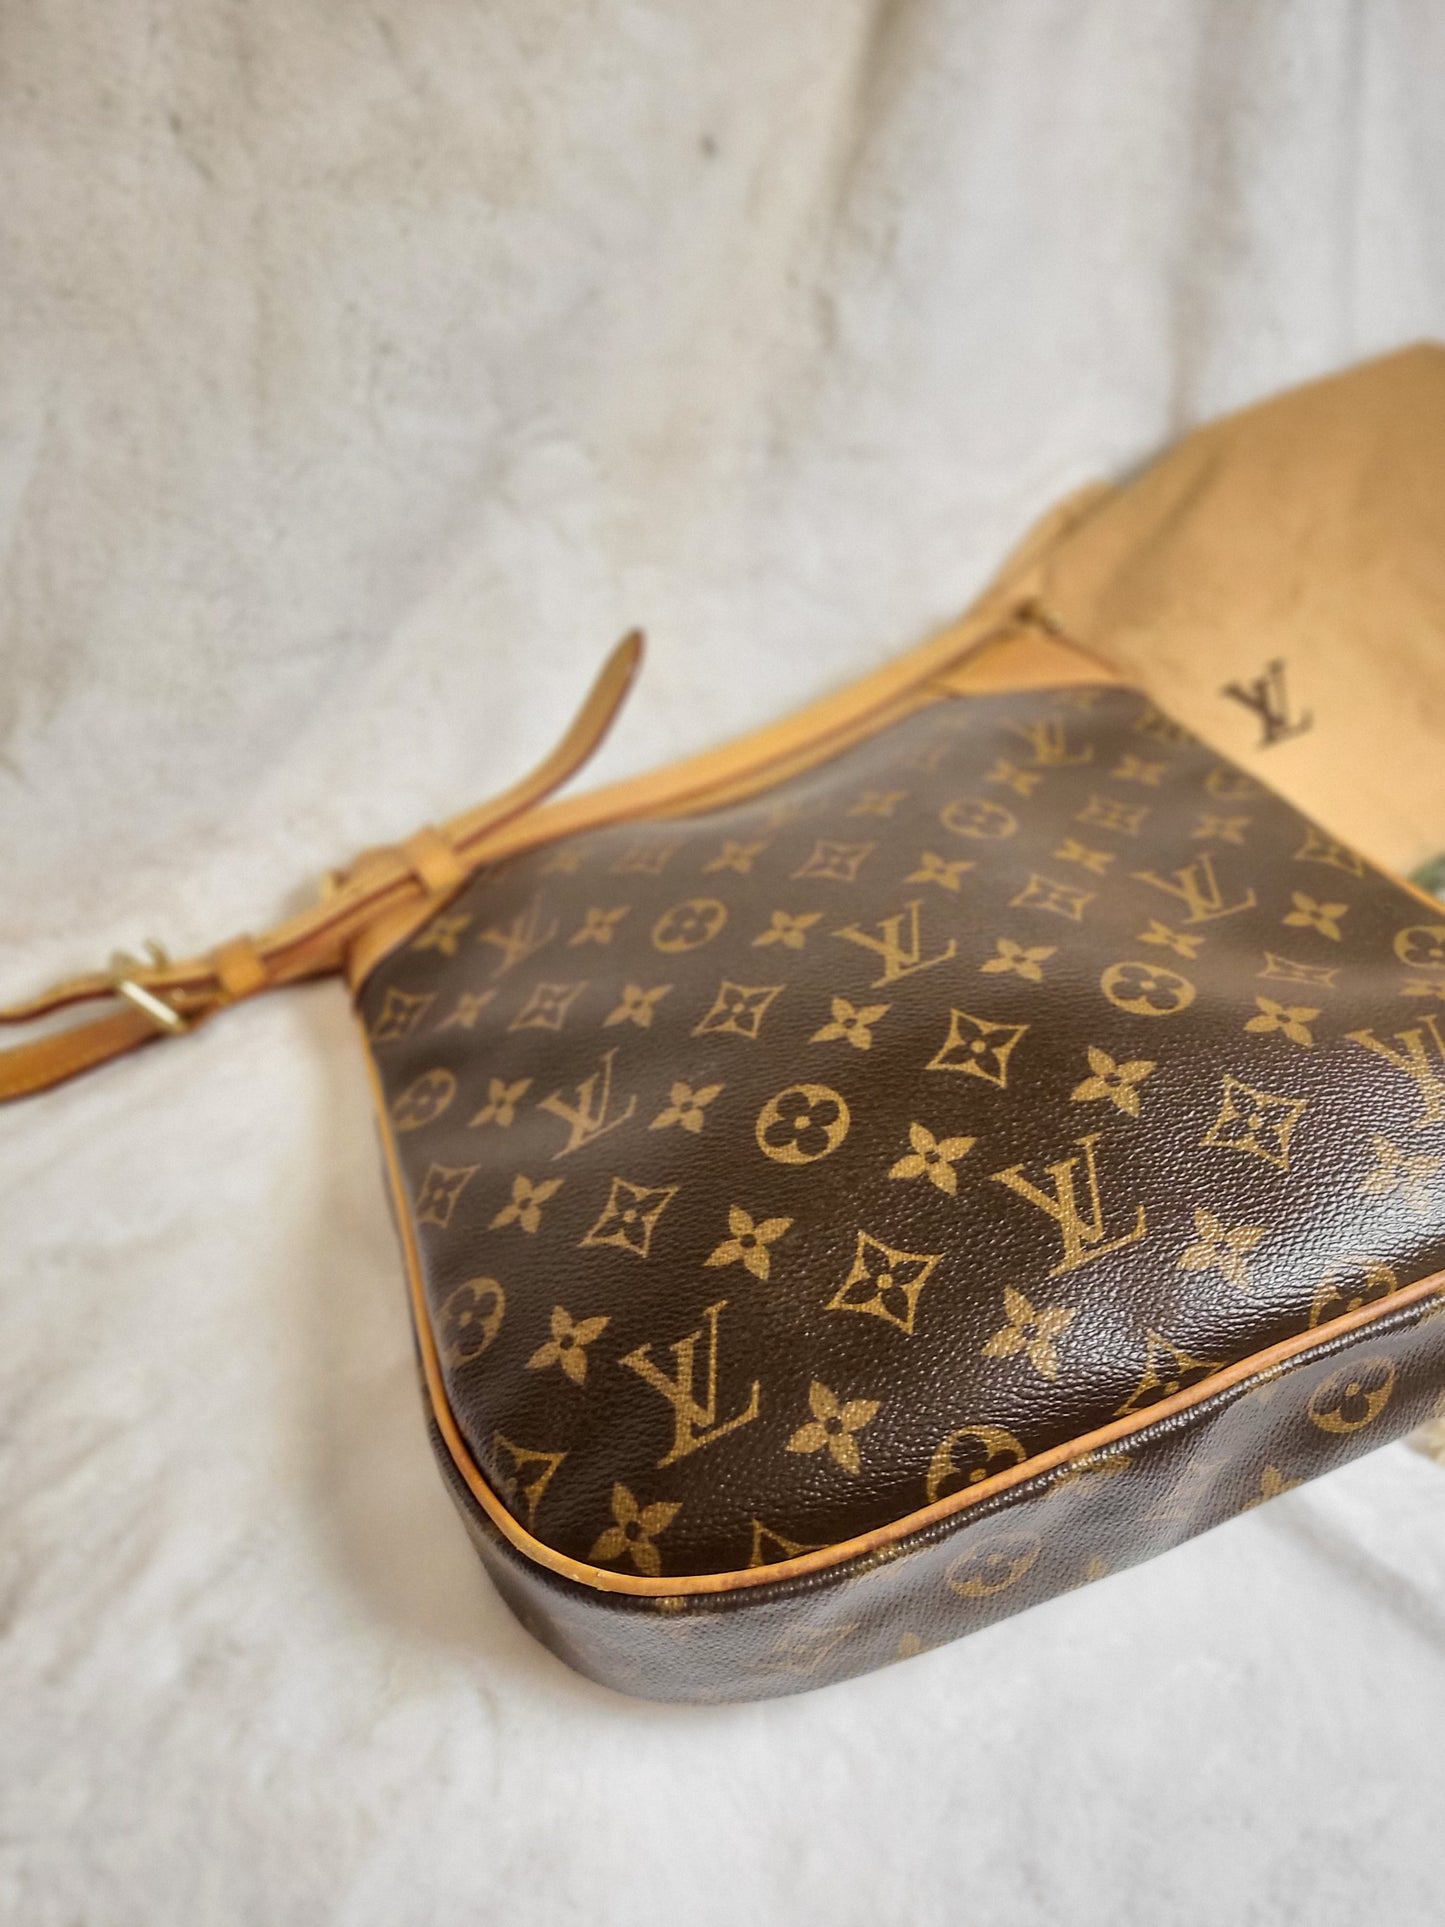 Authentic pre-owned Louis Vuitton odeon pm crossbody shoulder bag